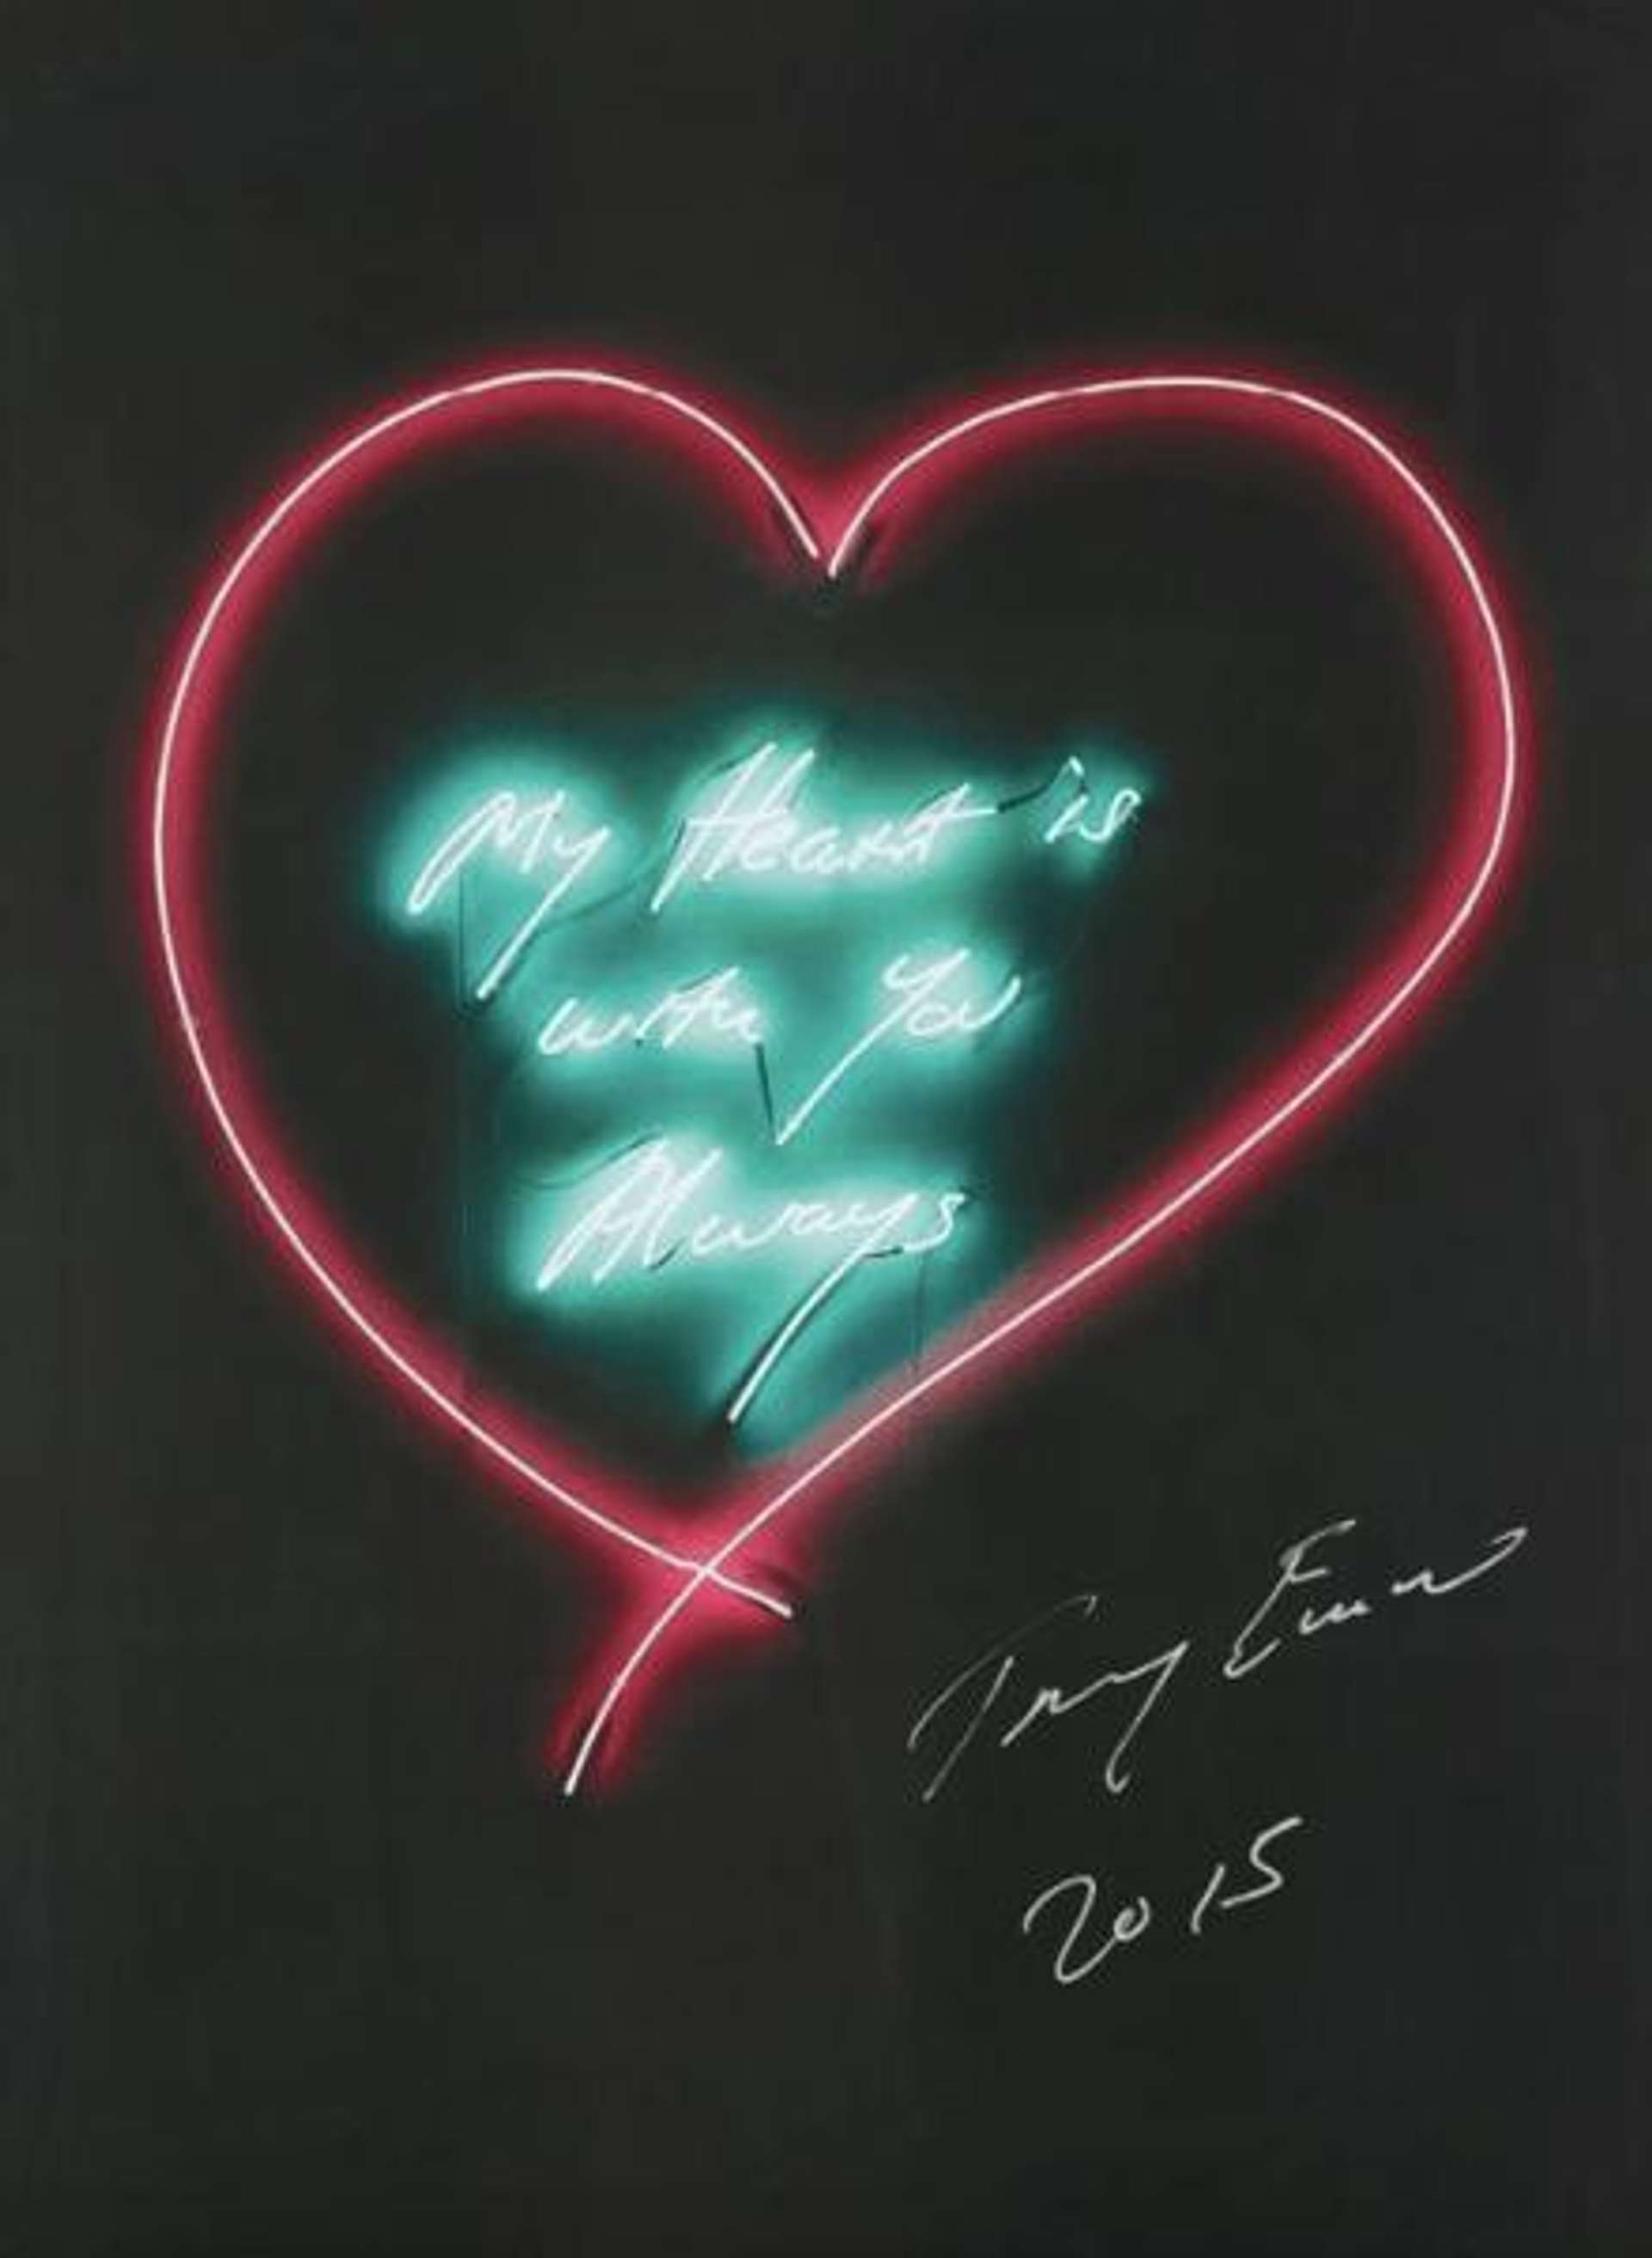 Tracey Emin’s My Heart Is With You Always (black). A lithograph of a neon sign of the words “My heart is with you always” inside of the outline of a red heart